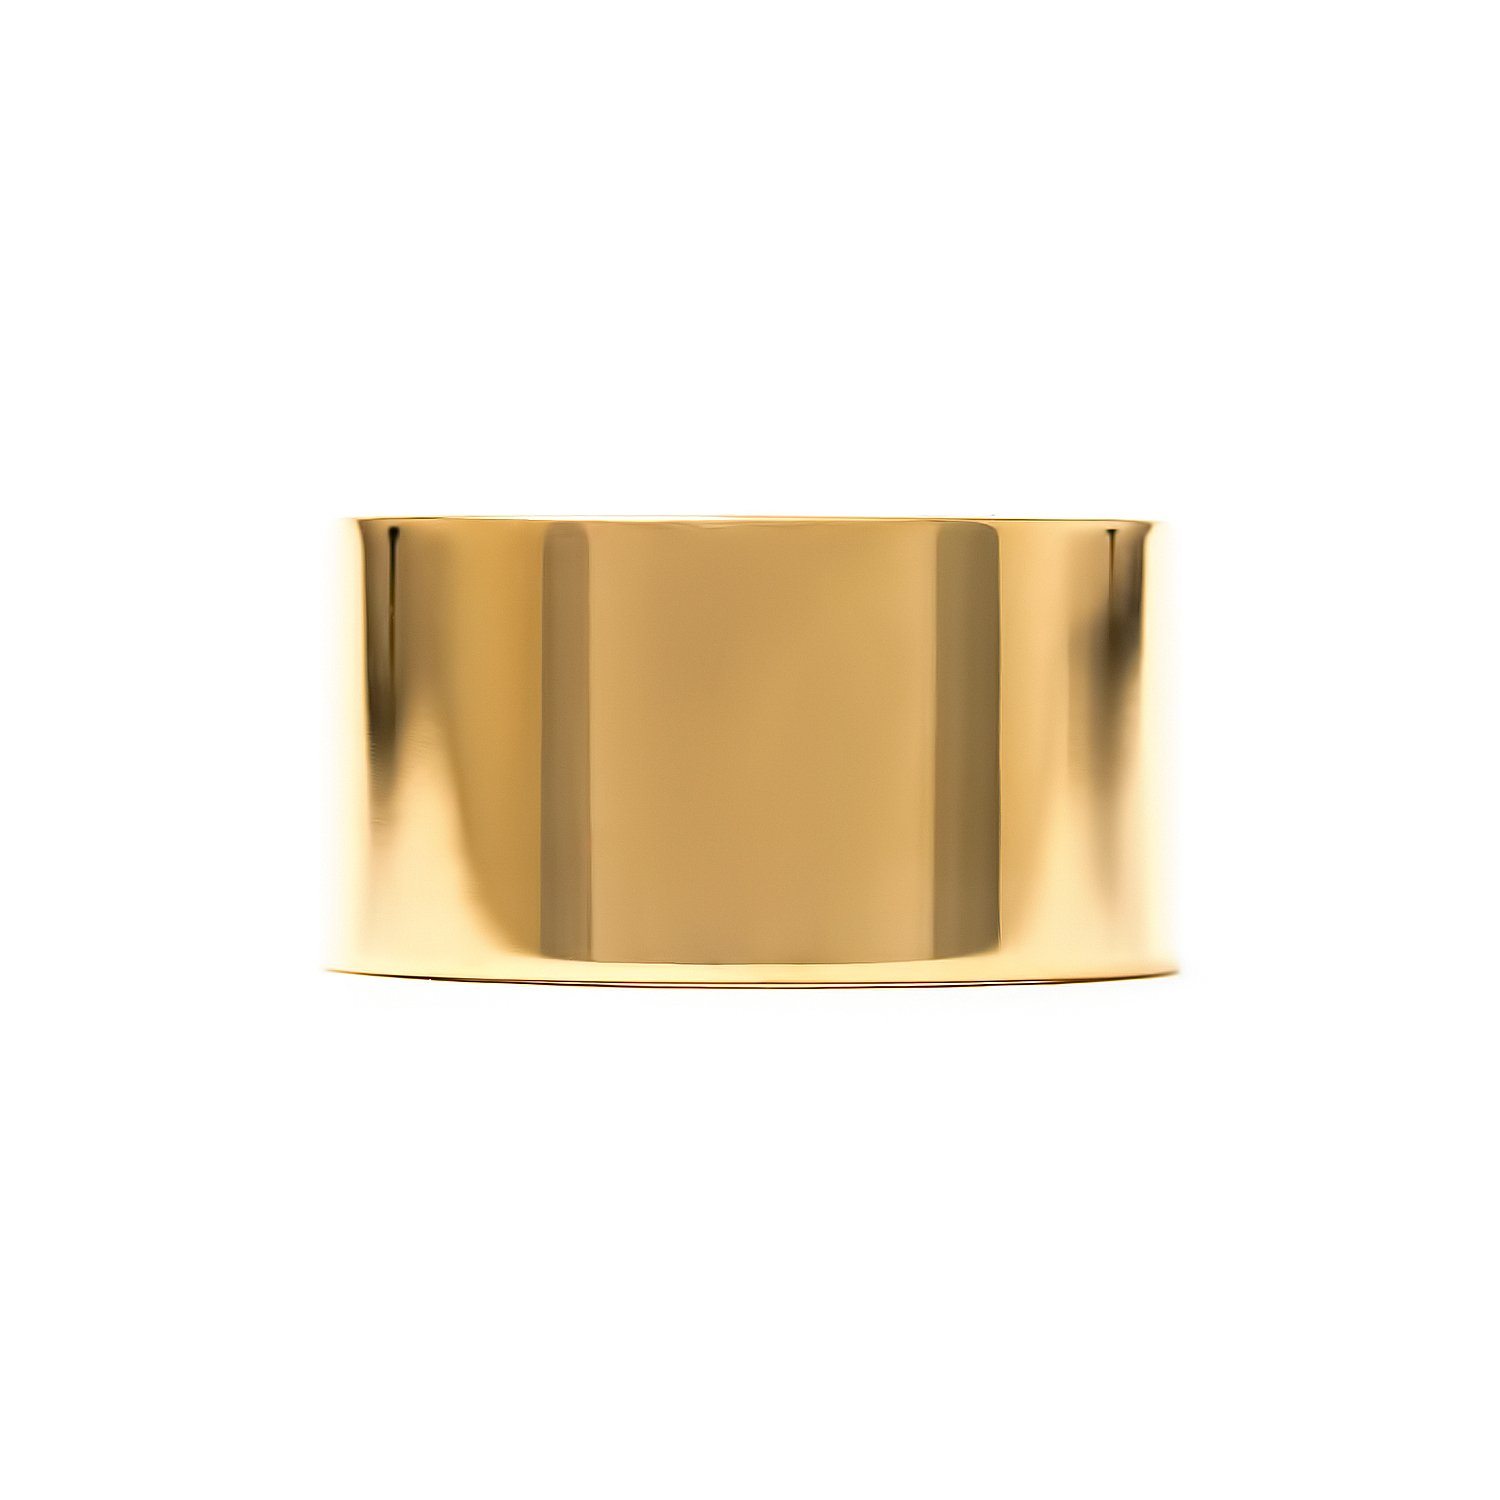 10mm cigar band in 14k yellow gold